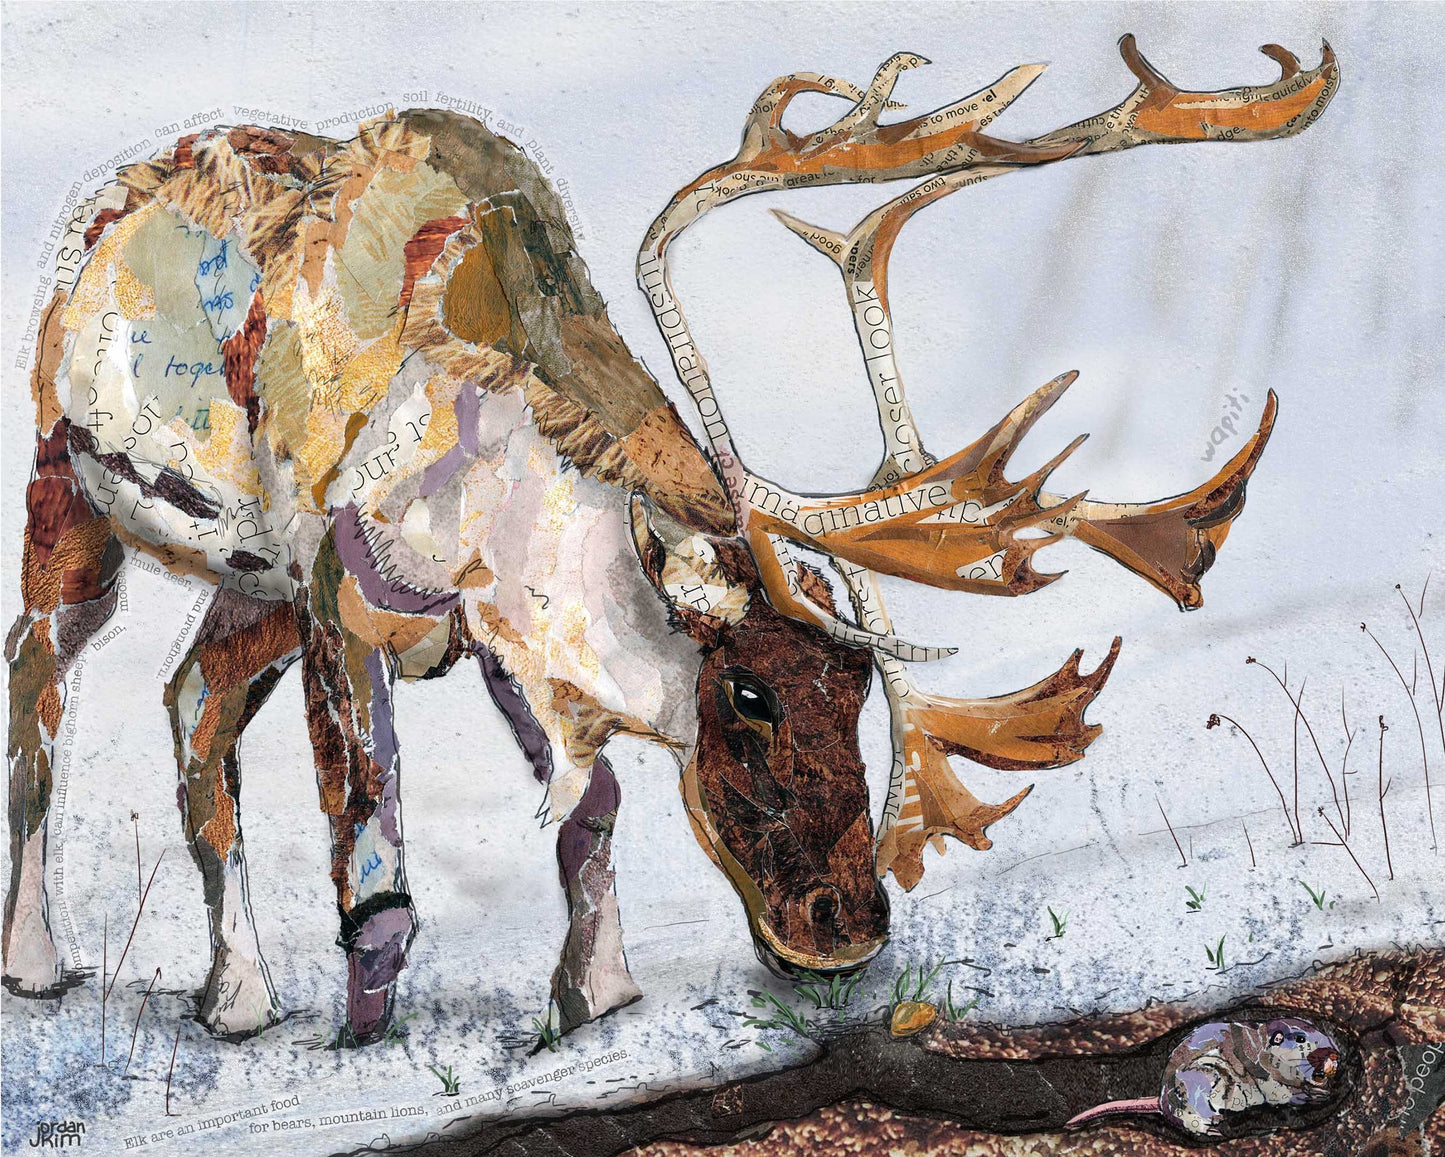 Greeting Card of mixed media collage of an elk in the snow, with a gopher below, Yellowstone - Blank Inside